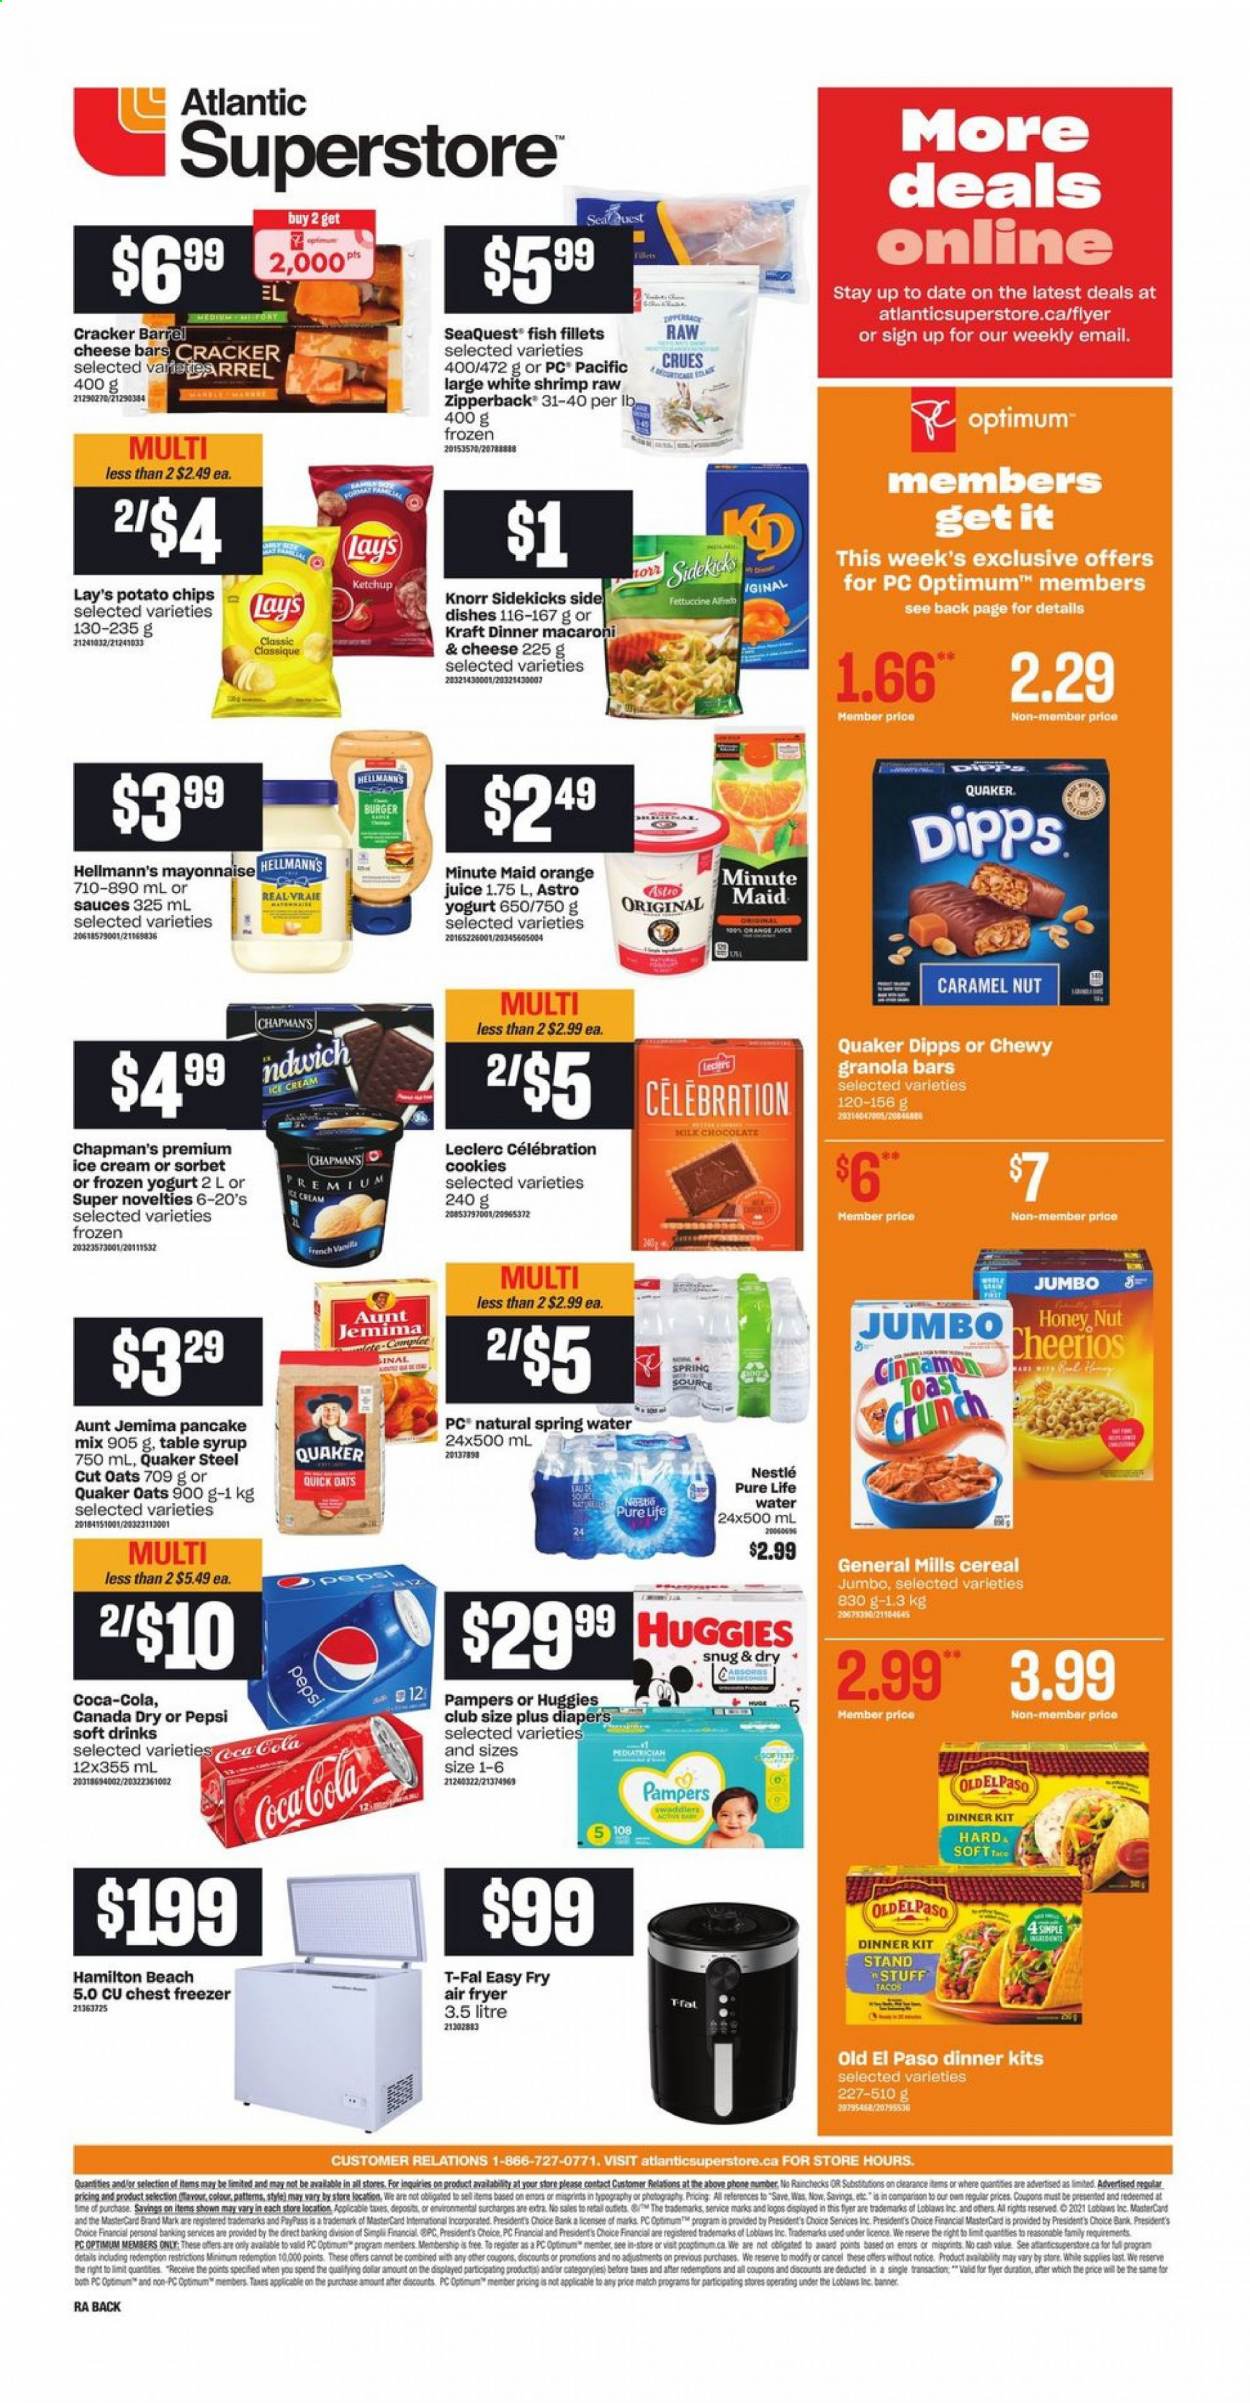 thumbnail - Circulaire Atlantic Superstore - 29 Avril 2021 - 05 Mai 2021 - Produits soldés - Knorr, granola, Nestlé, cookies, chips, Lay’s, Pepsi, Huggies, ketchup, Pampers. Page 2.